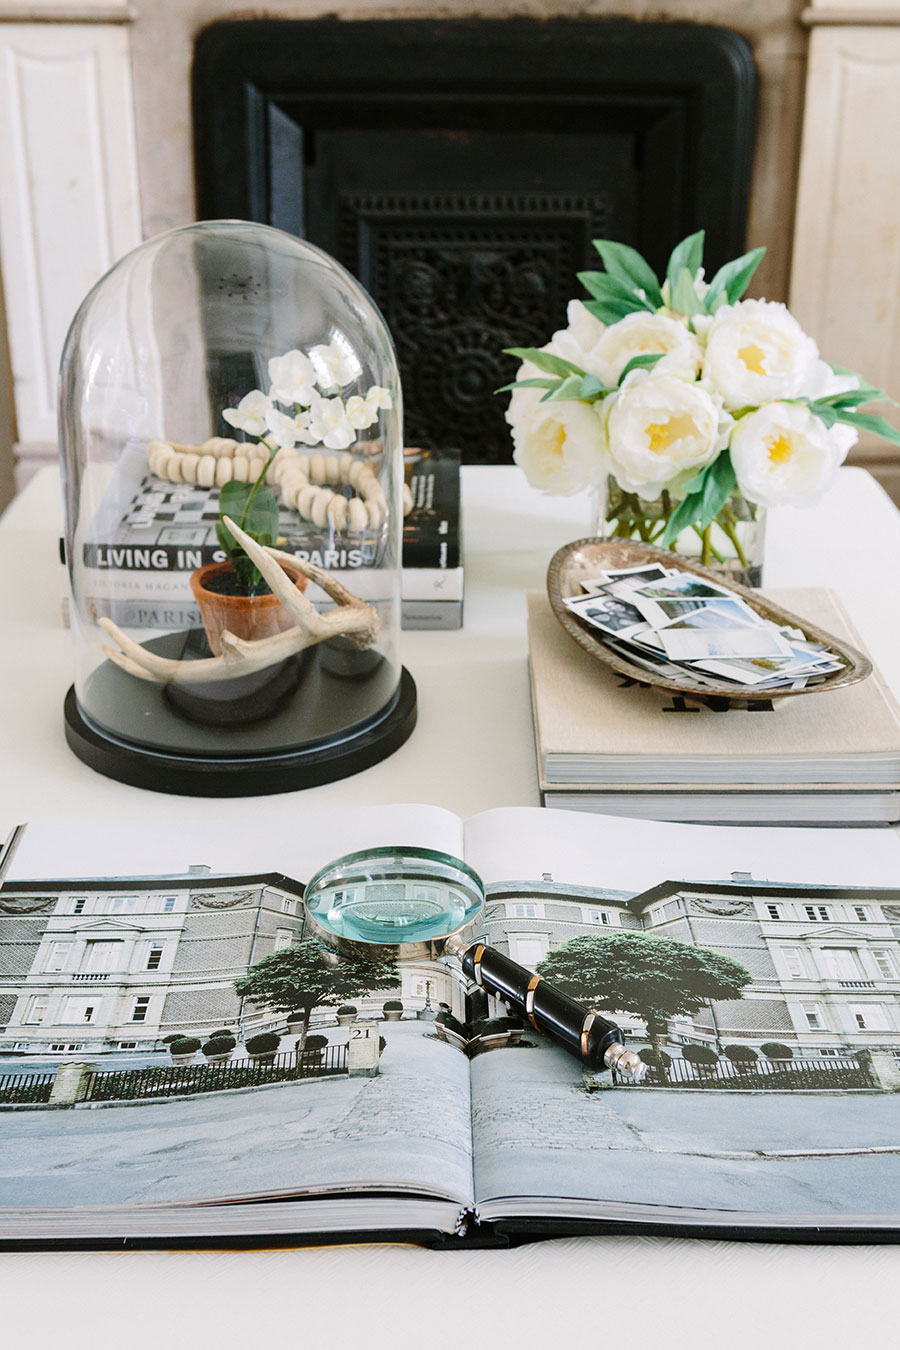 Incident, event Withdrawal Violate How to Style Your Home: 21 Beautiful Coffee Table Books - Elizabeth Street  Post